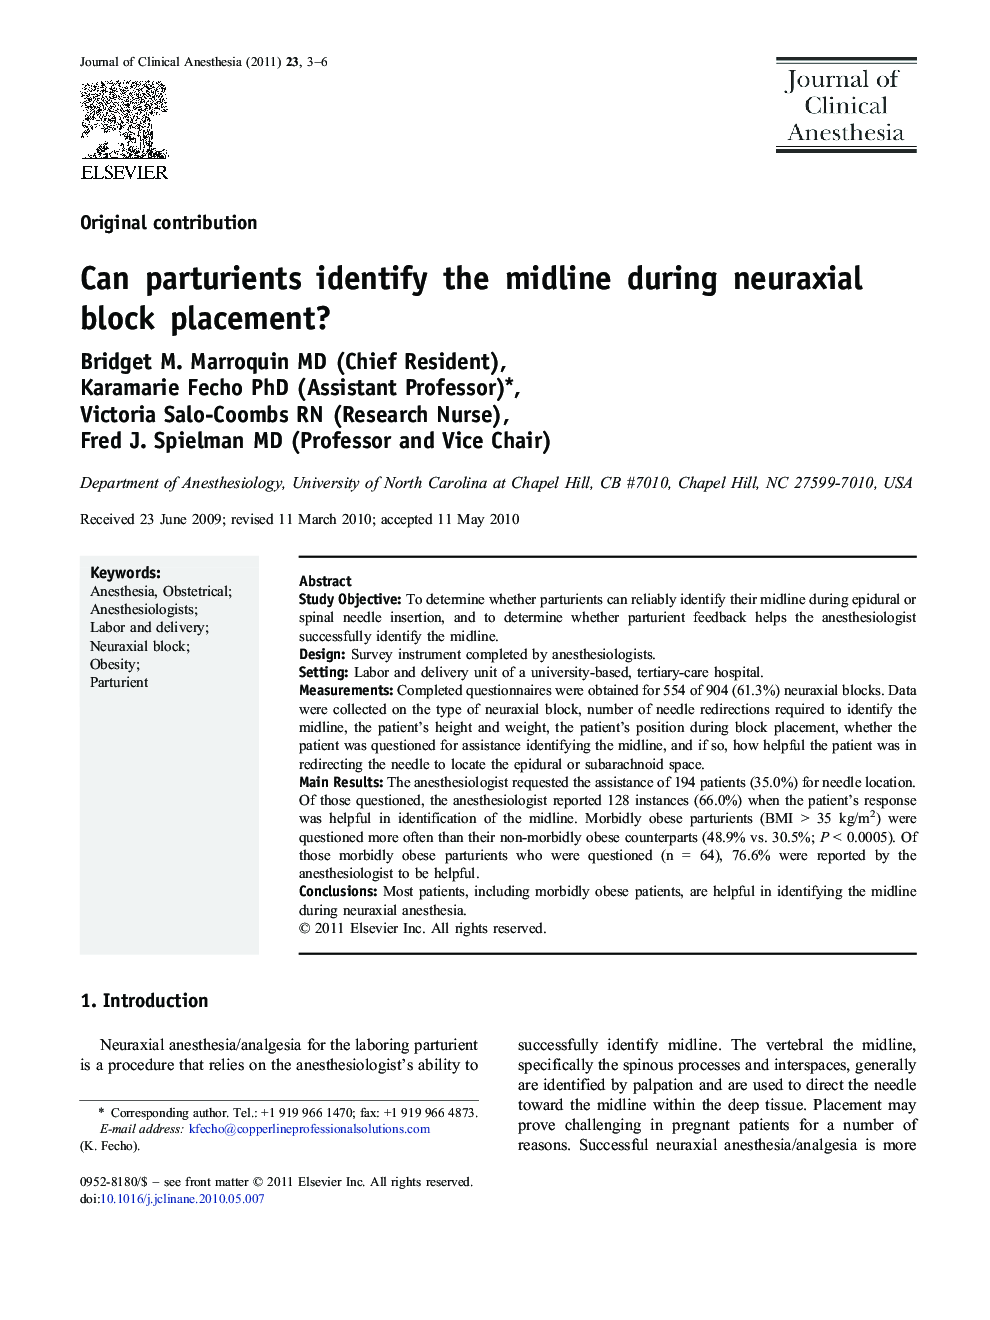 Can parturients identify the midline during neuraxial block placement?